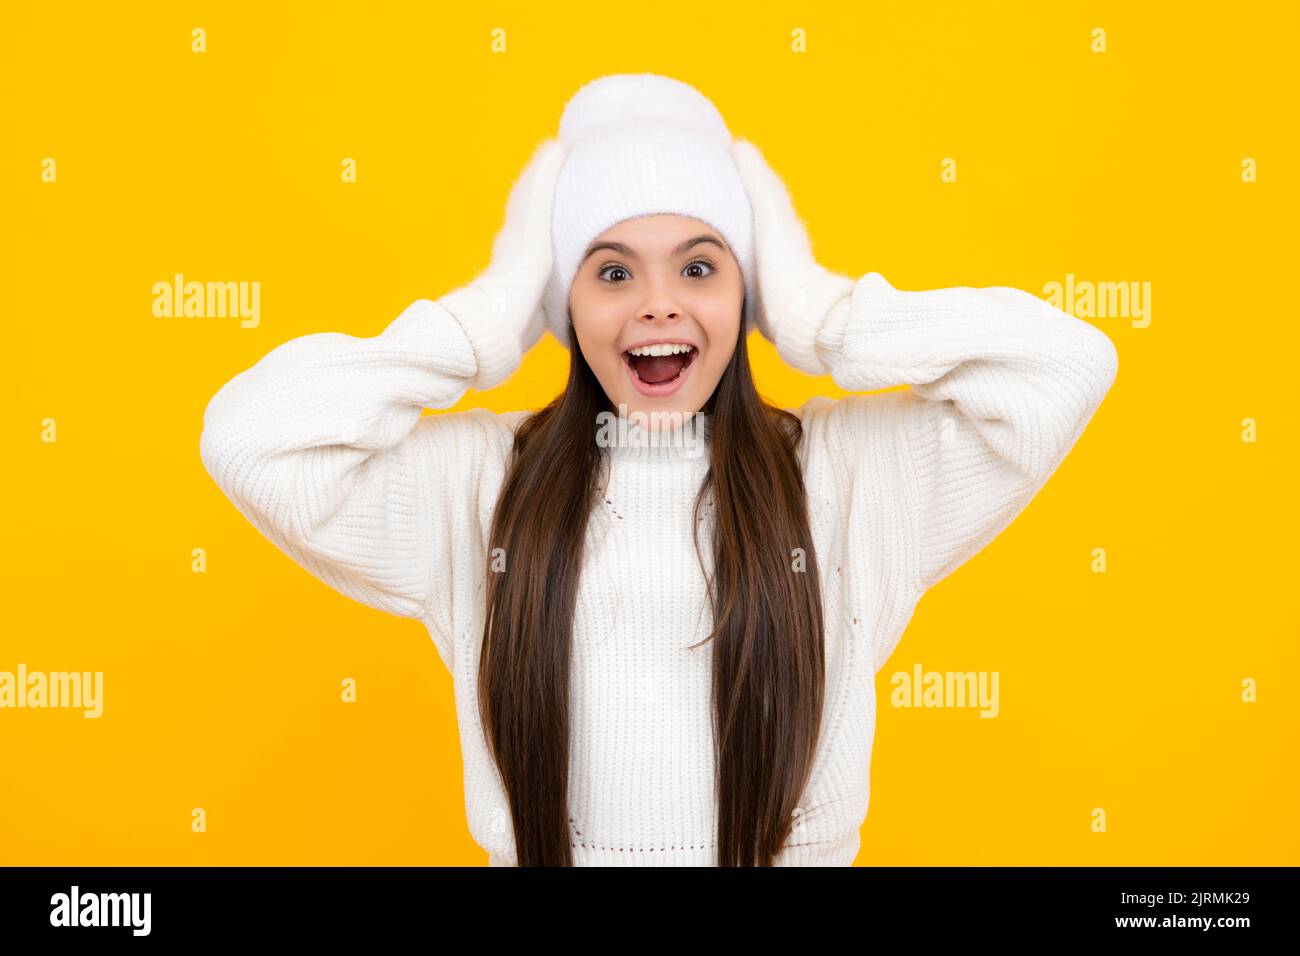 Child with positive expression, joyful and exciting, dressed in casual winter cloth over yellow background with empty space. Excited face. Amazed Stock Photo